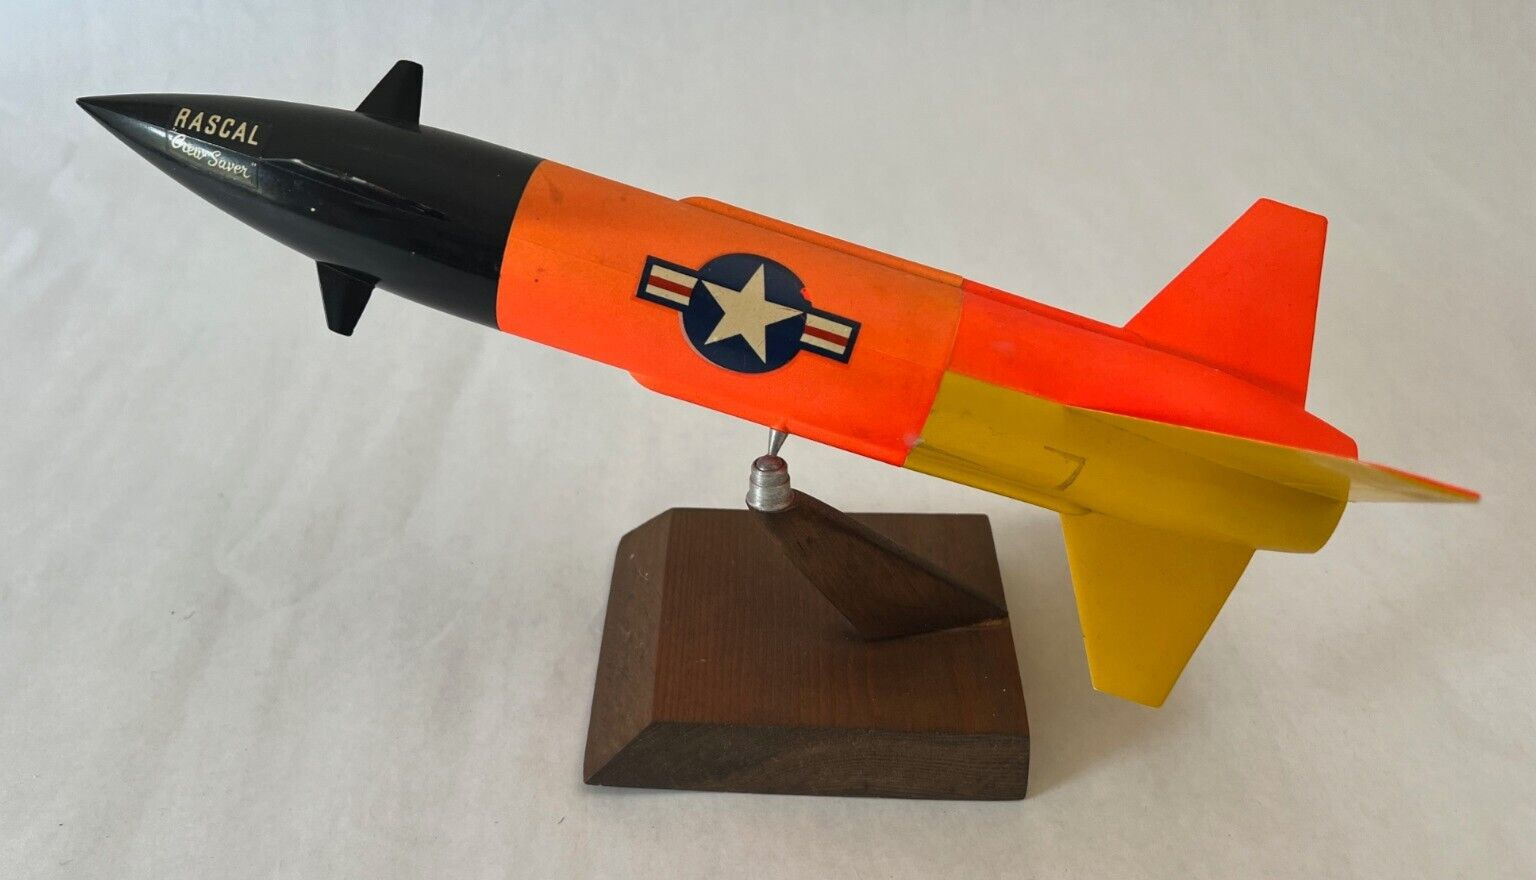 Vtg US Air Force RASCAL Bell Aircraft Air-to-Surface Missile DESK MODEL 1:32 '58